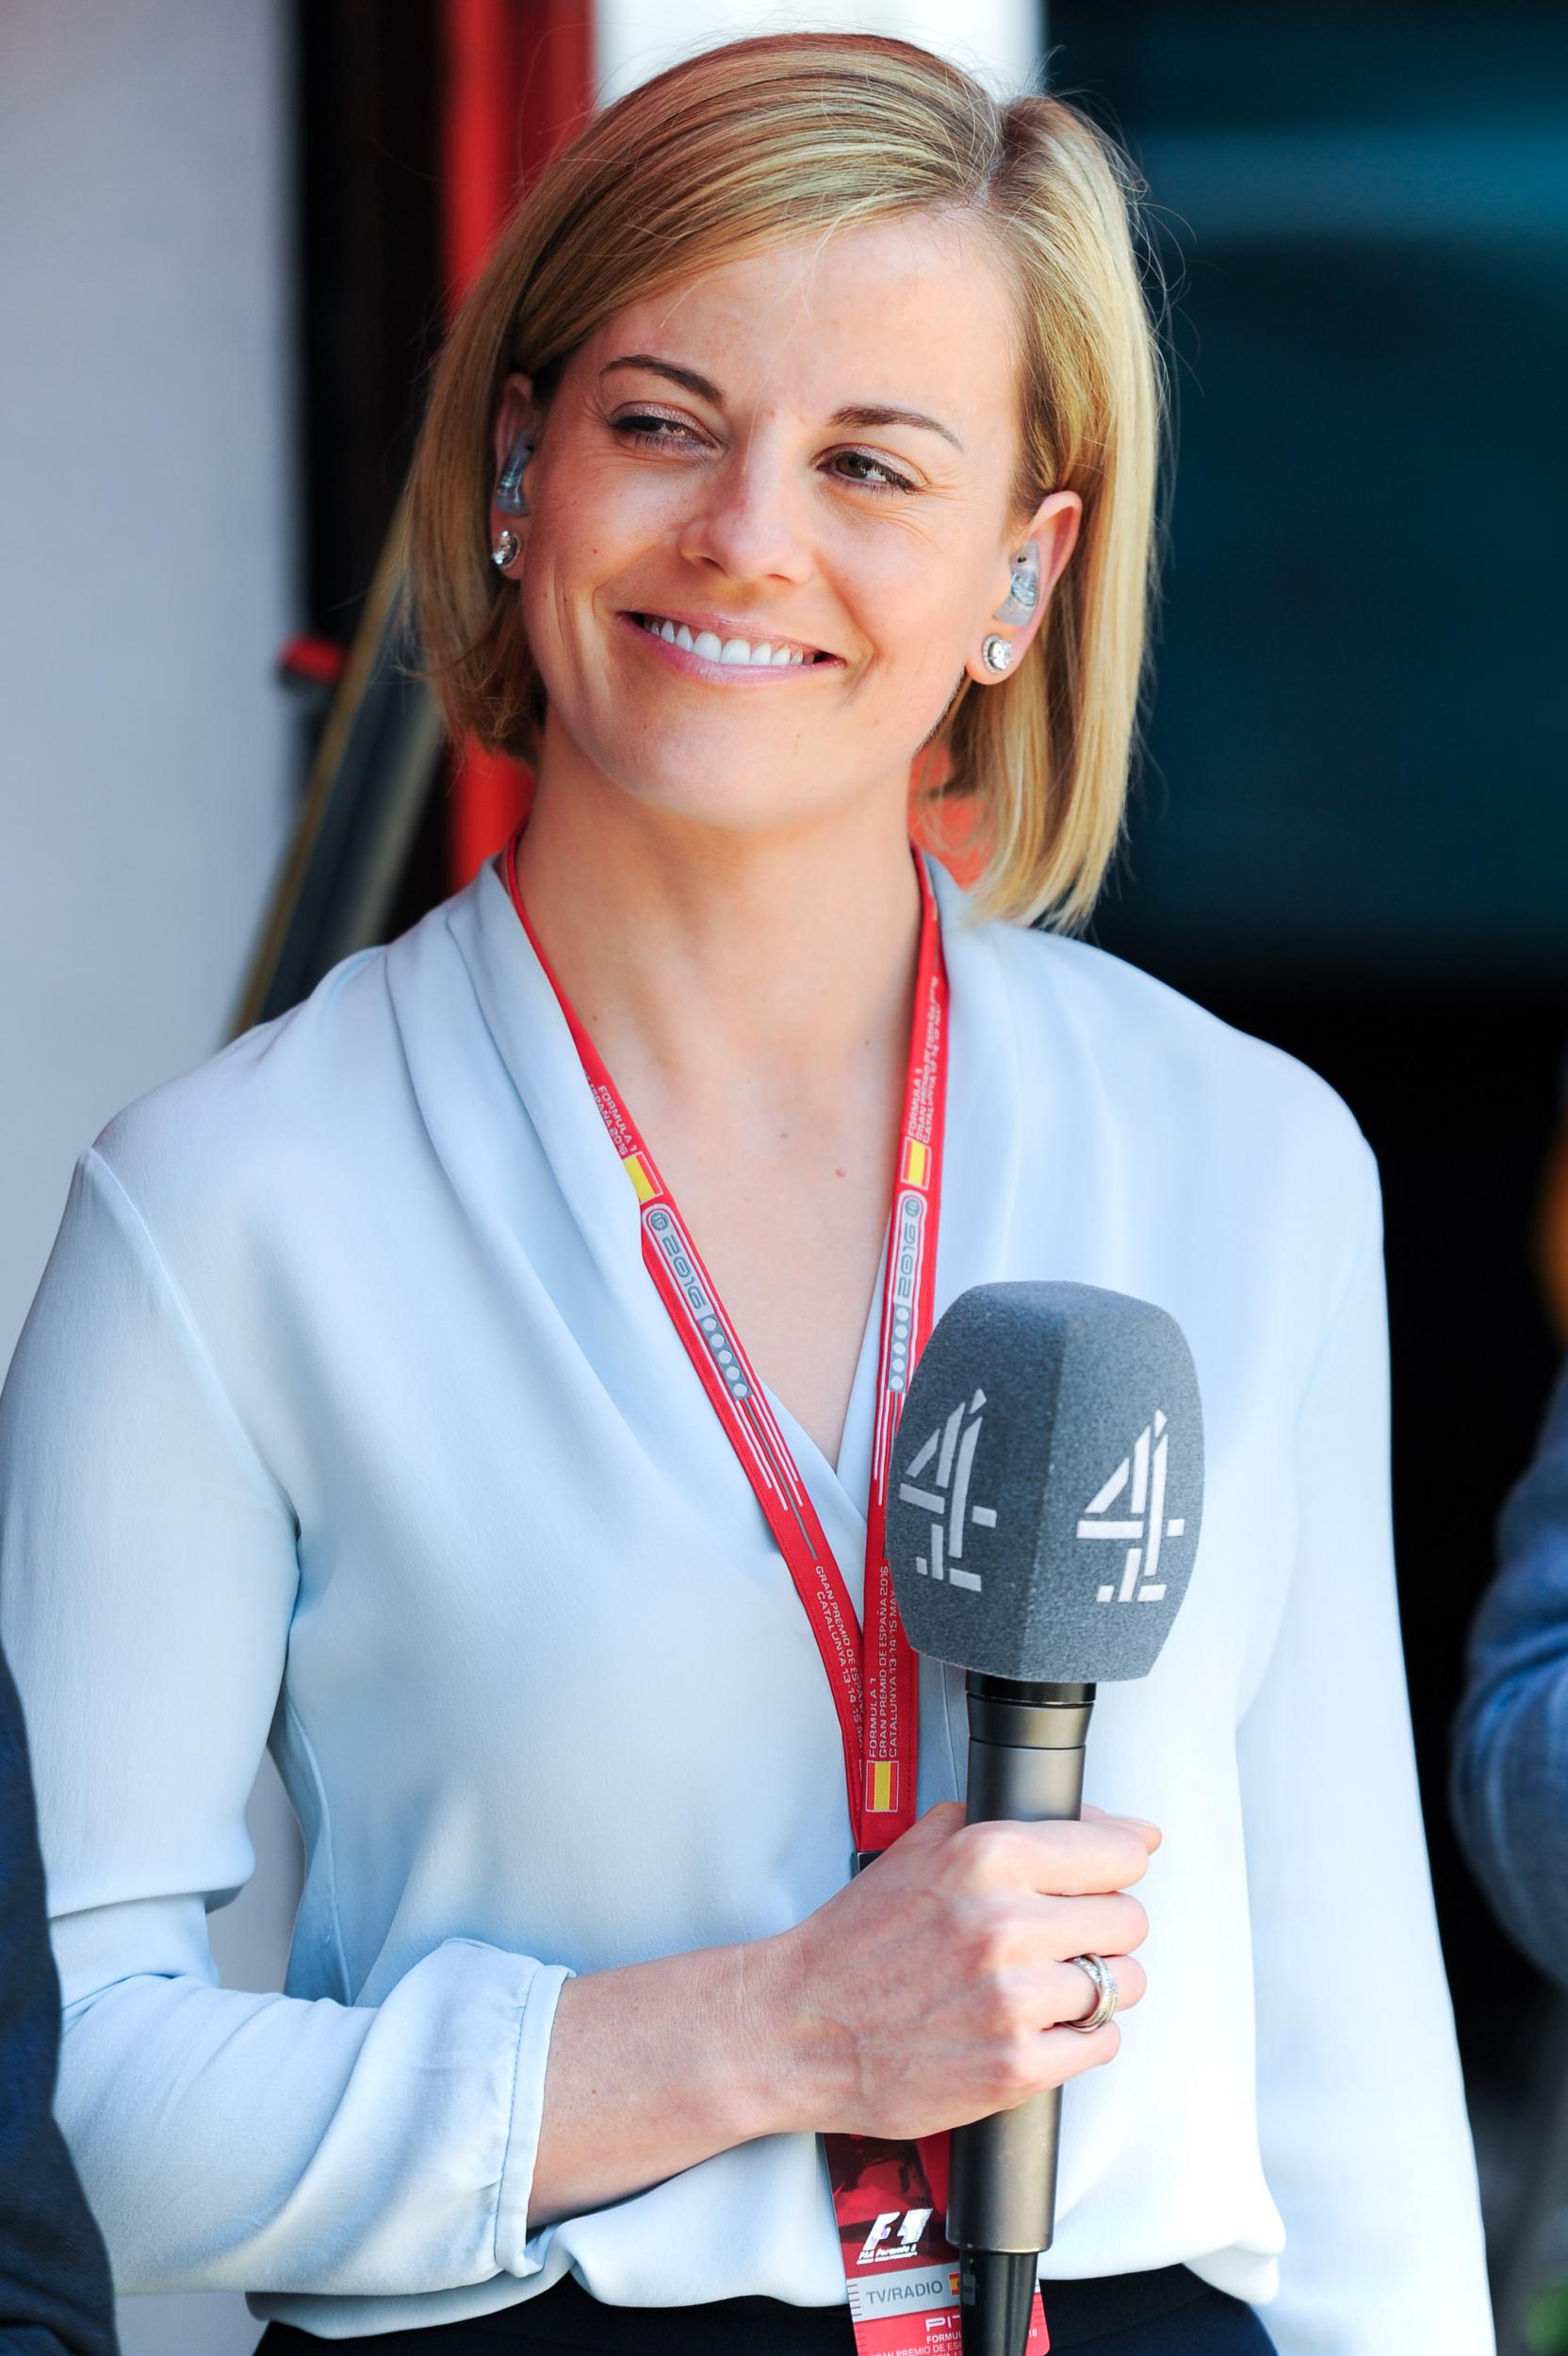 Susie Wolff retired in 2015 before joining Channel 4's coverage